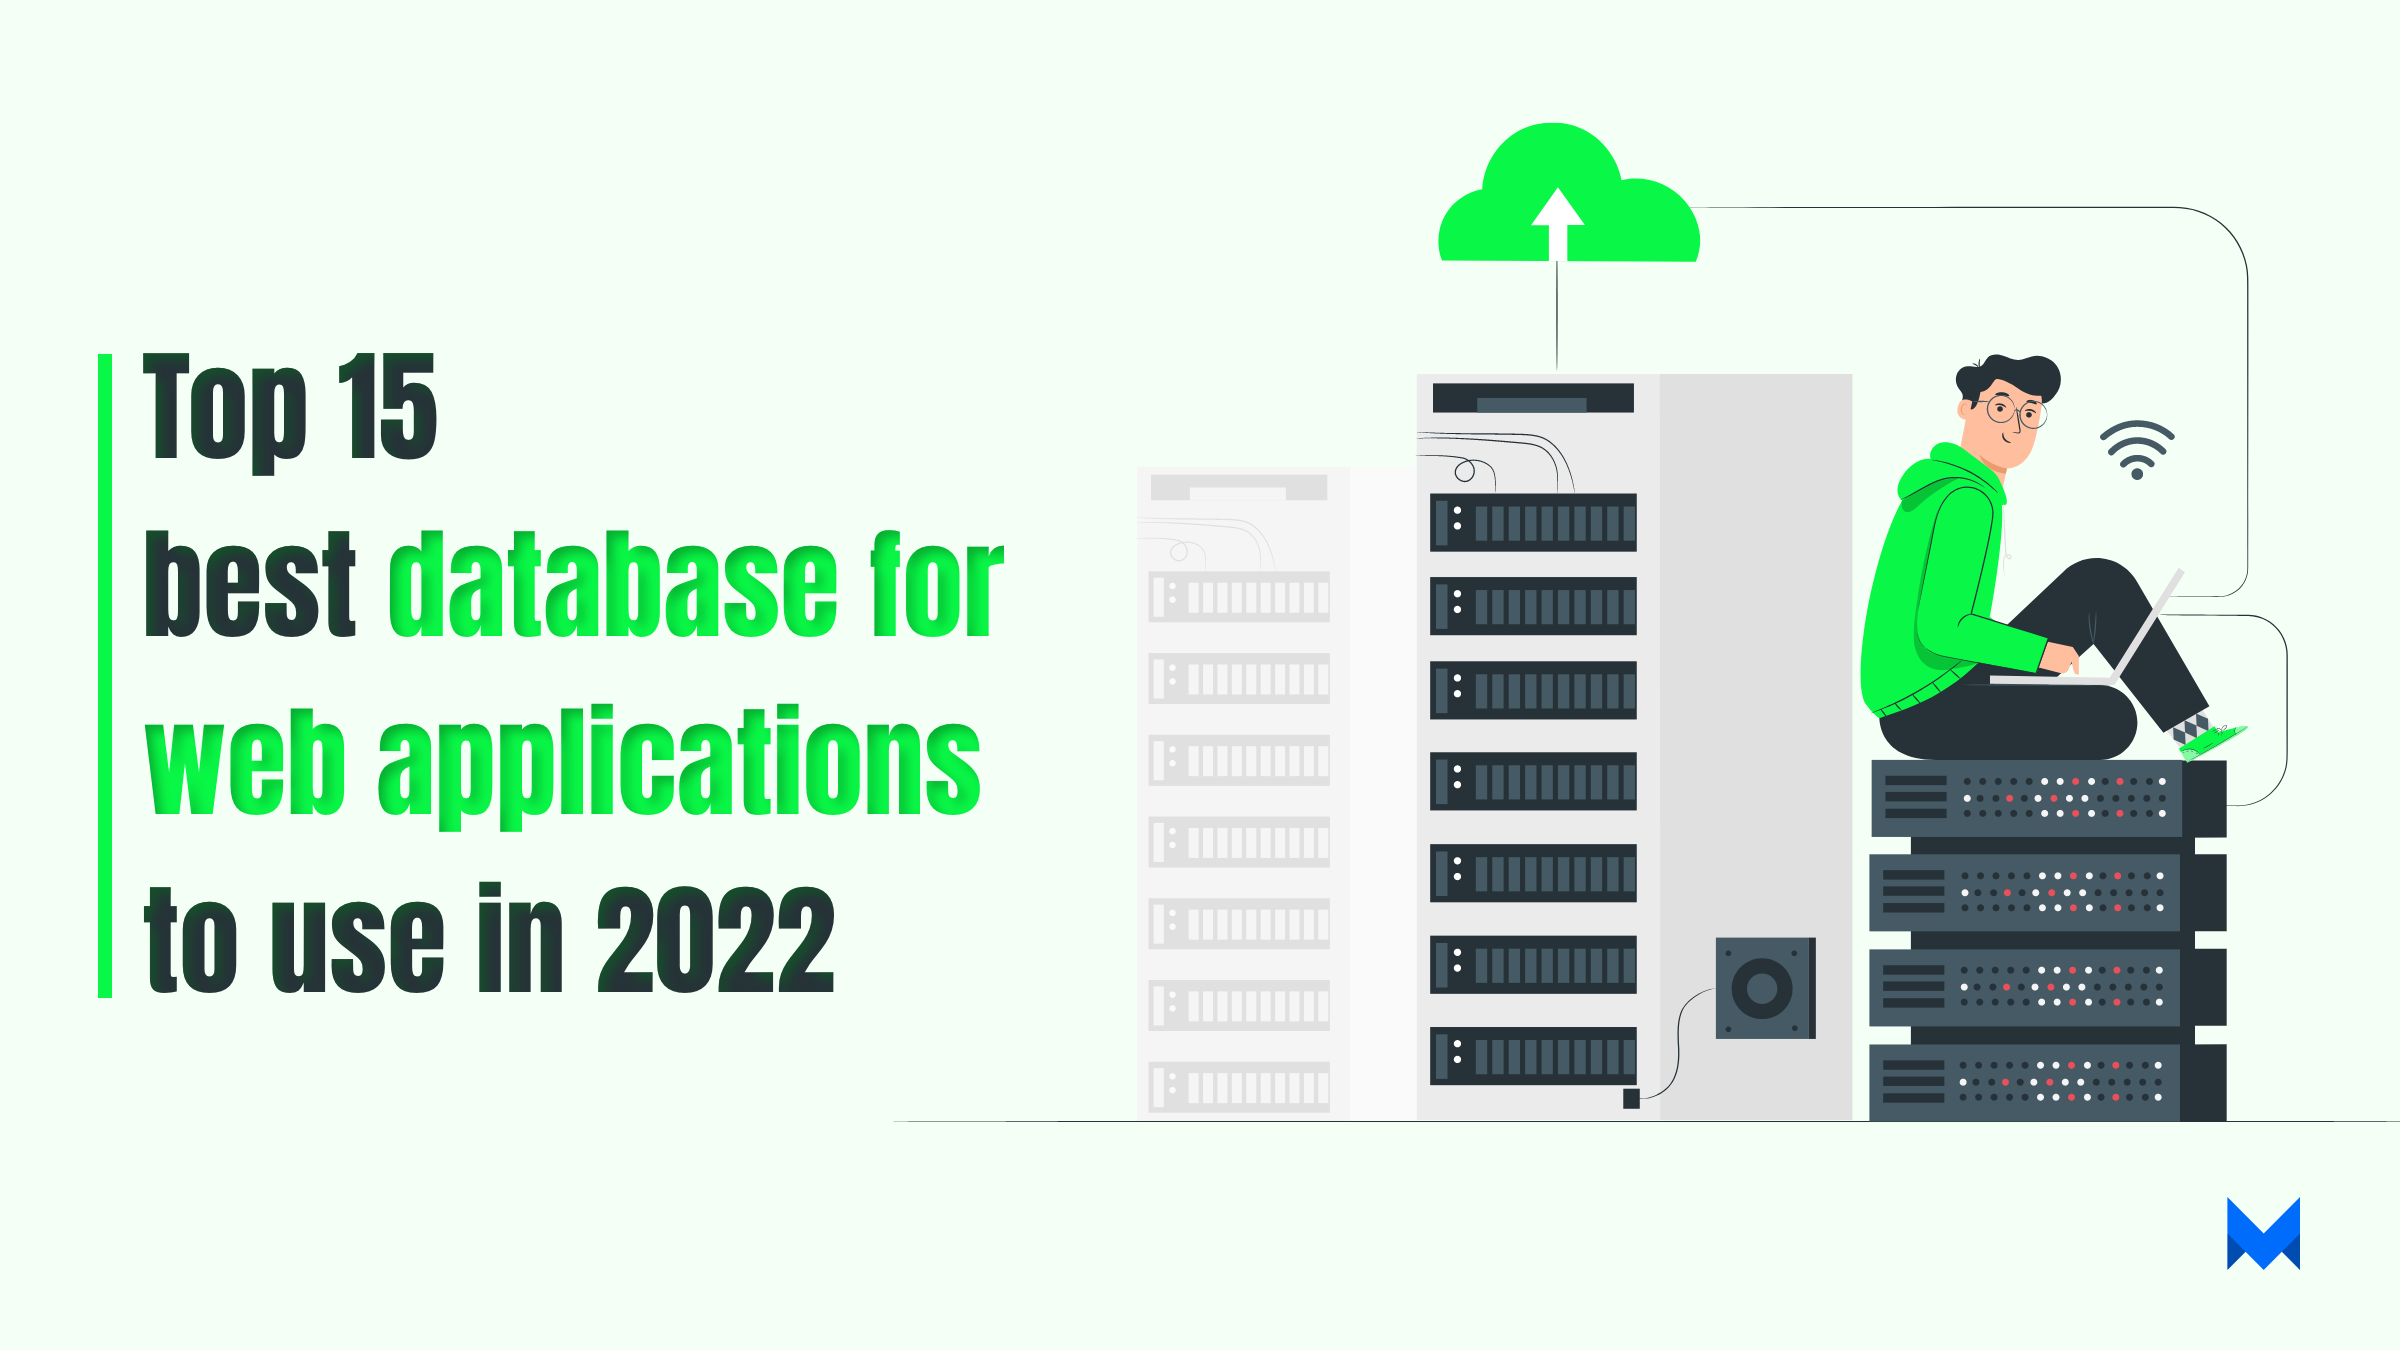 Top 15 Best Databases for Web Applications to Use in 2022